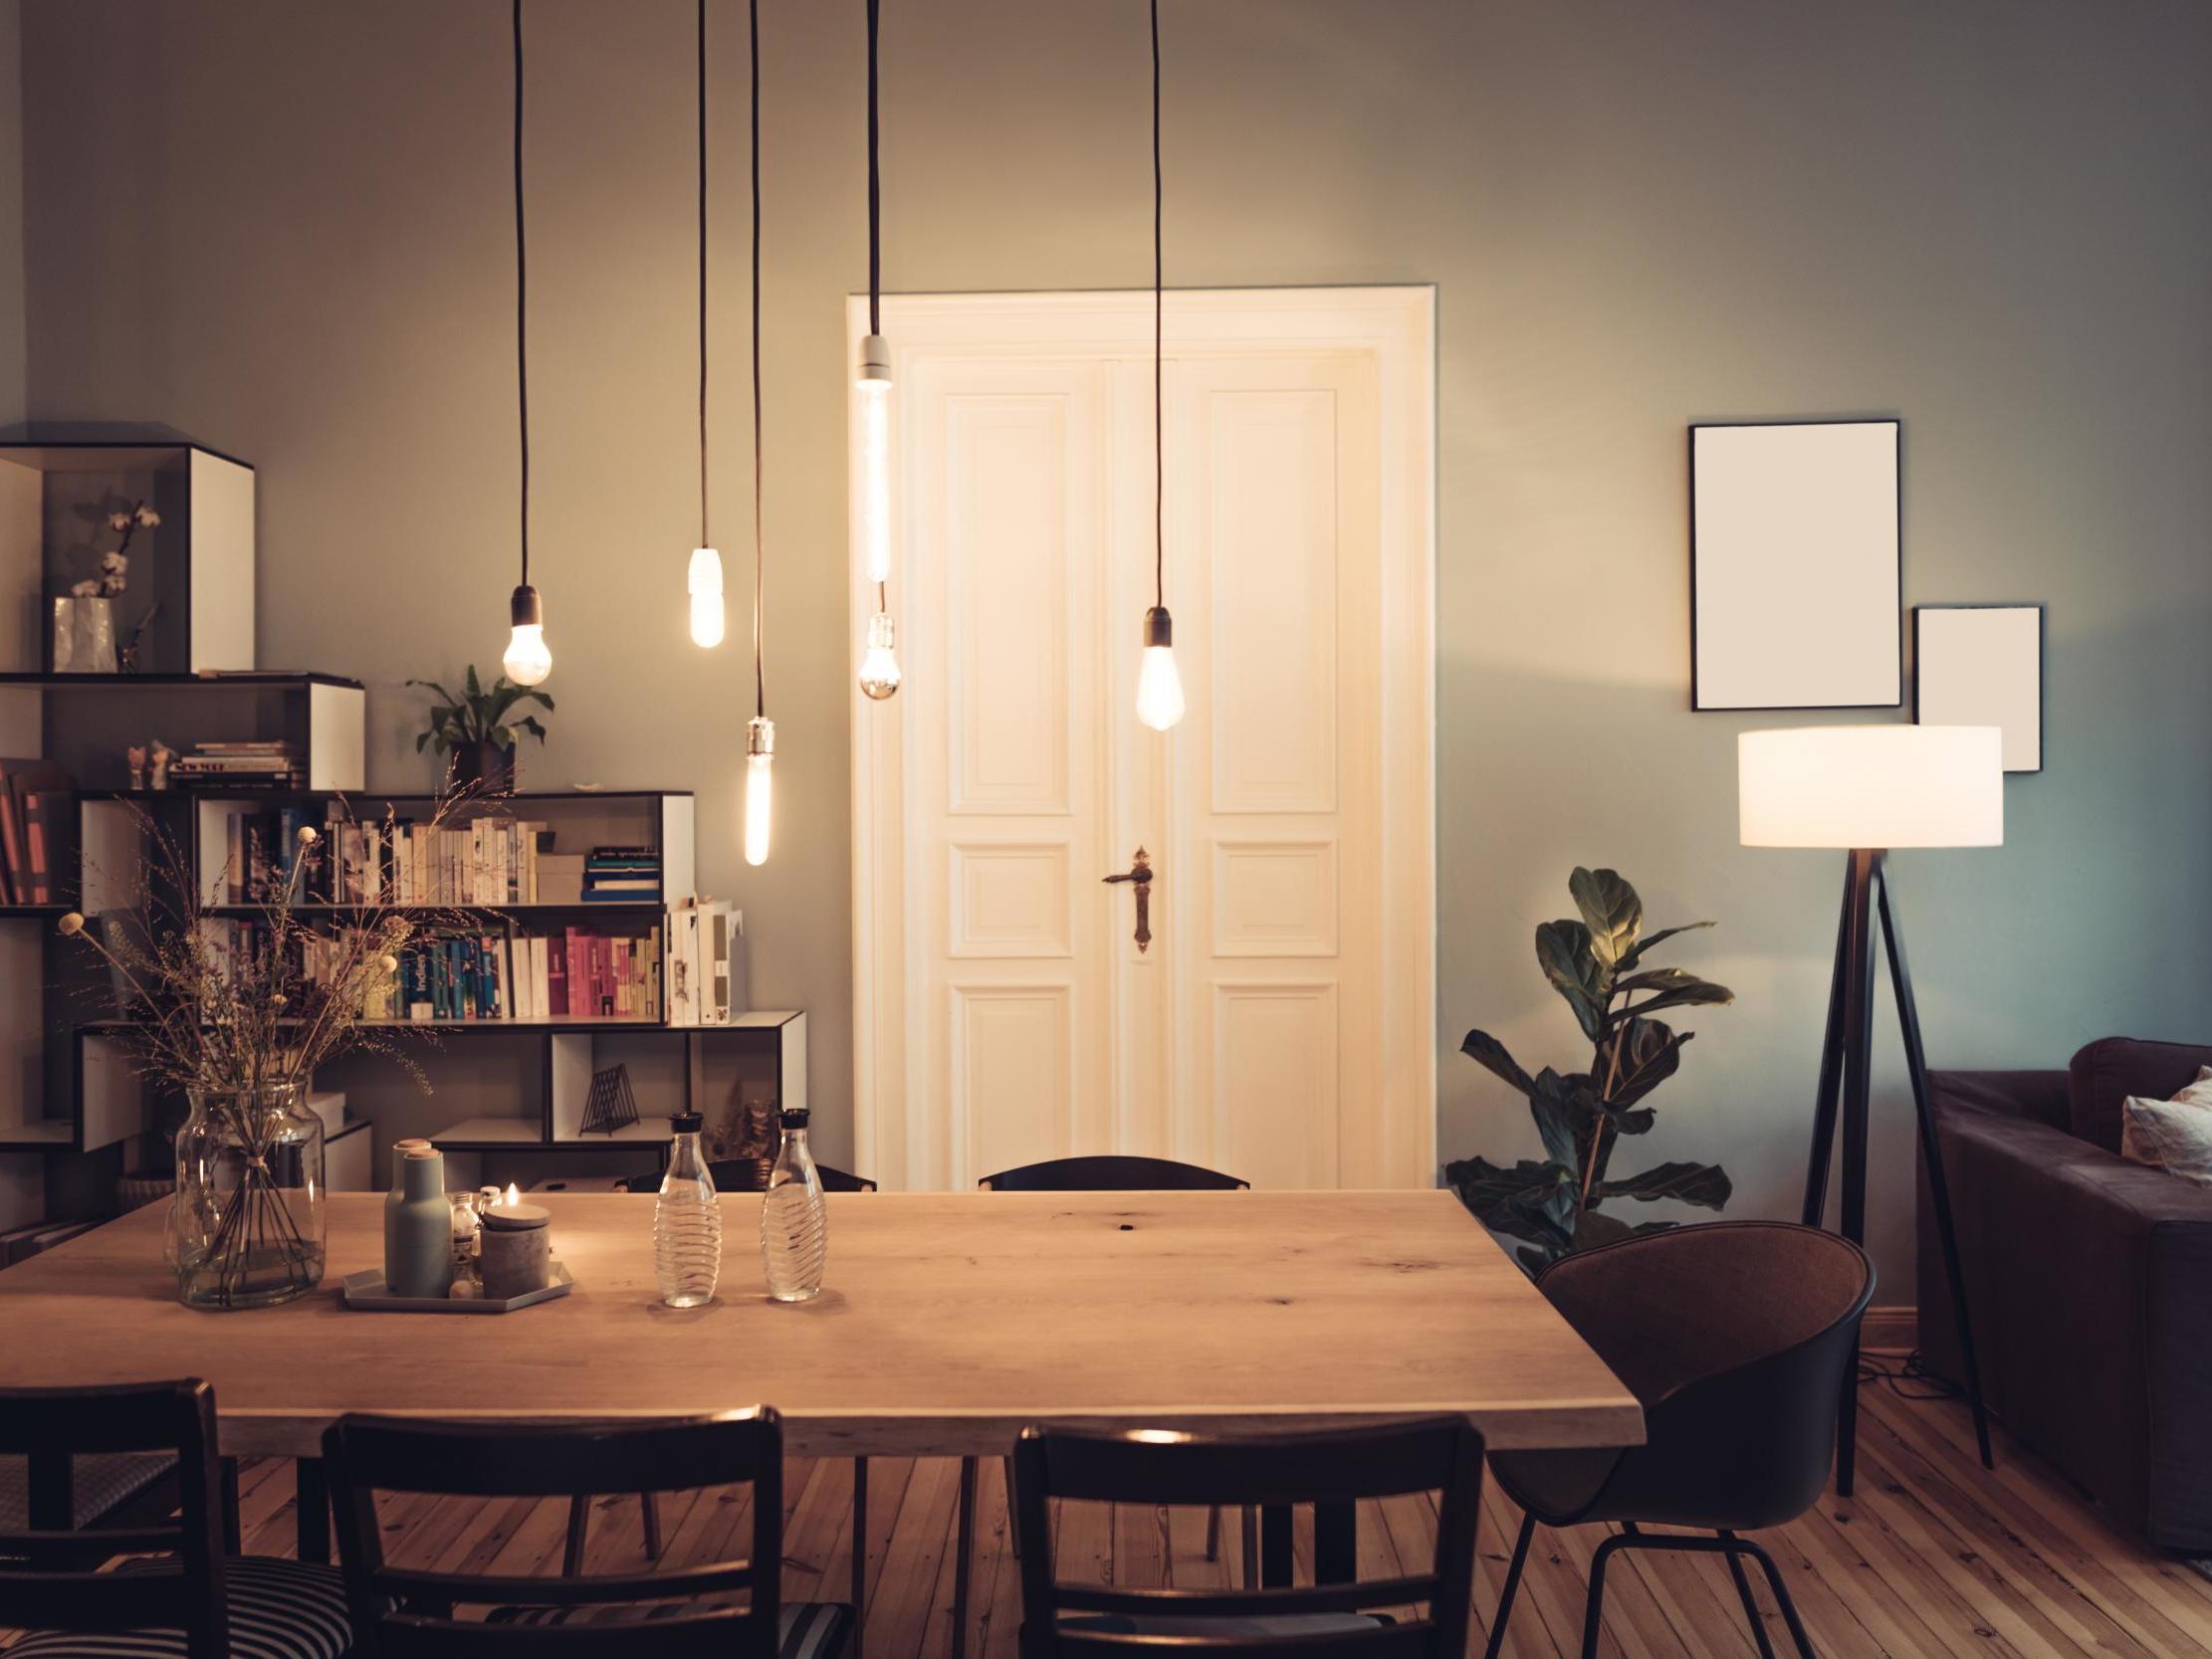 Clever light can create a warm atmosphere for your home